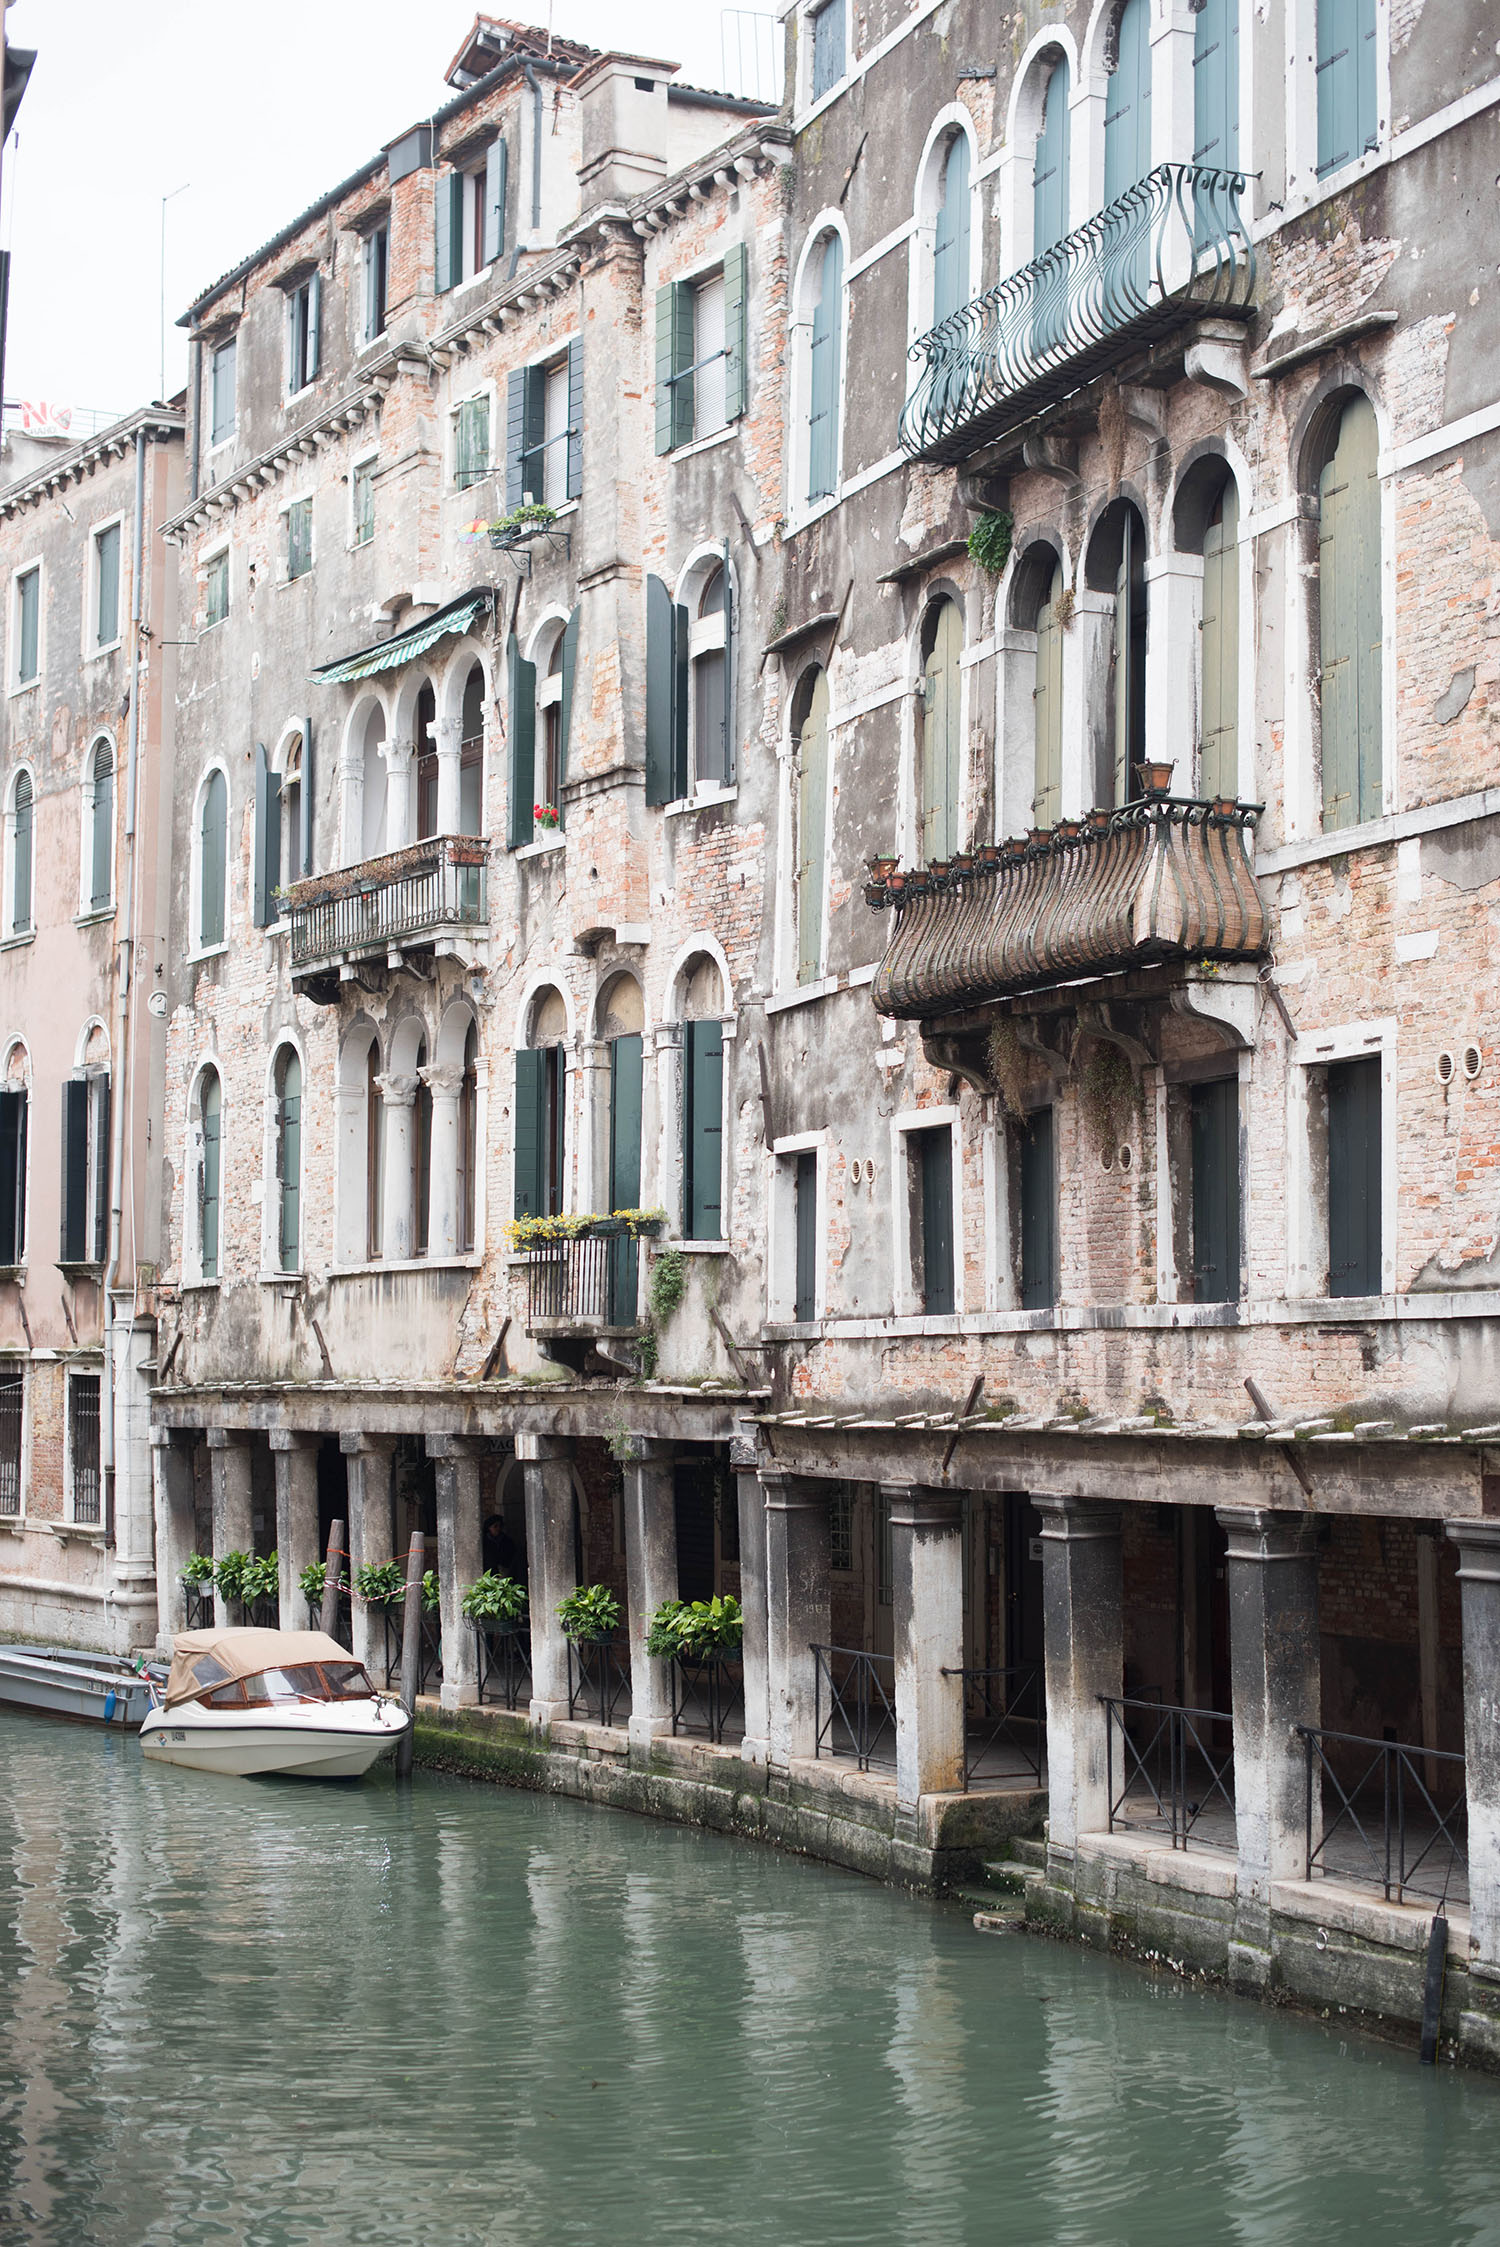 Typical white and green canal-side homes in Venice, Italy, as captured by travel blogger Cee Fardoe of Coco & Vera